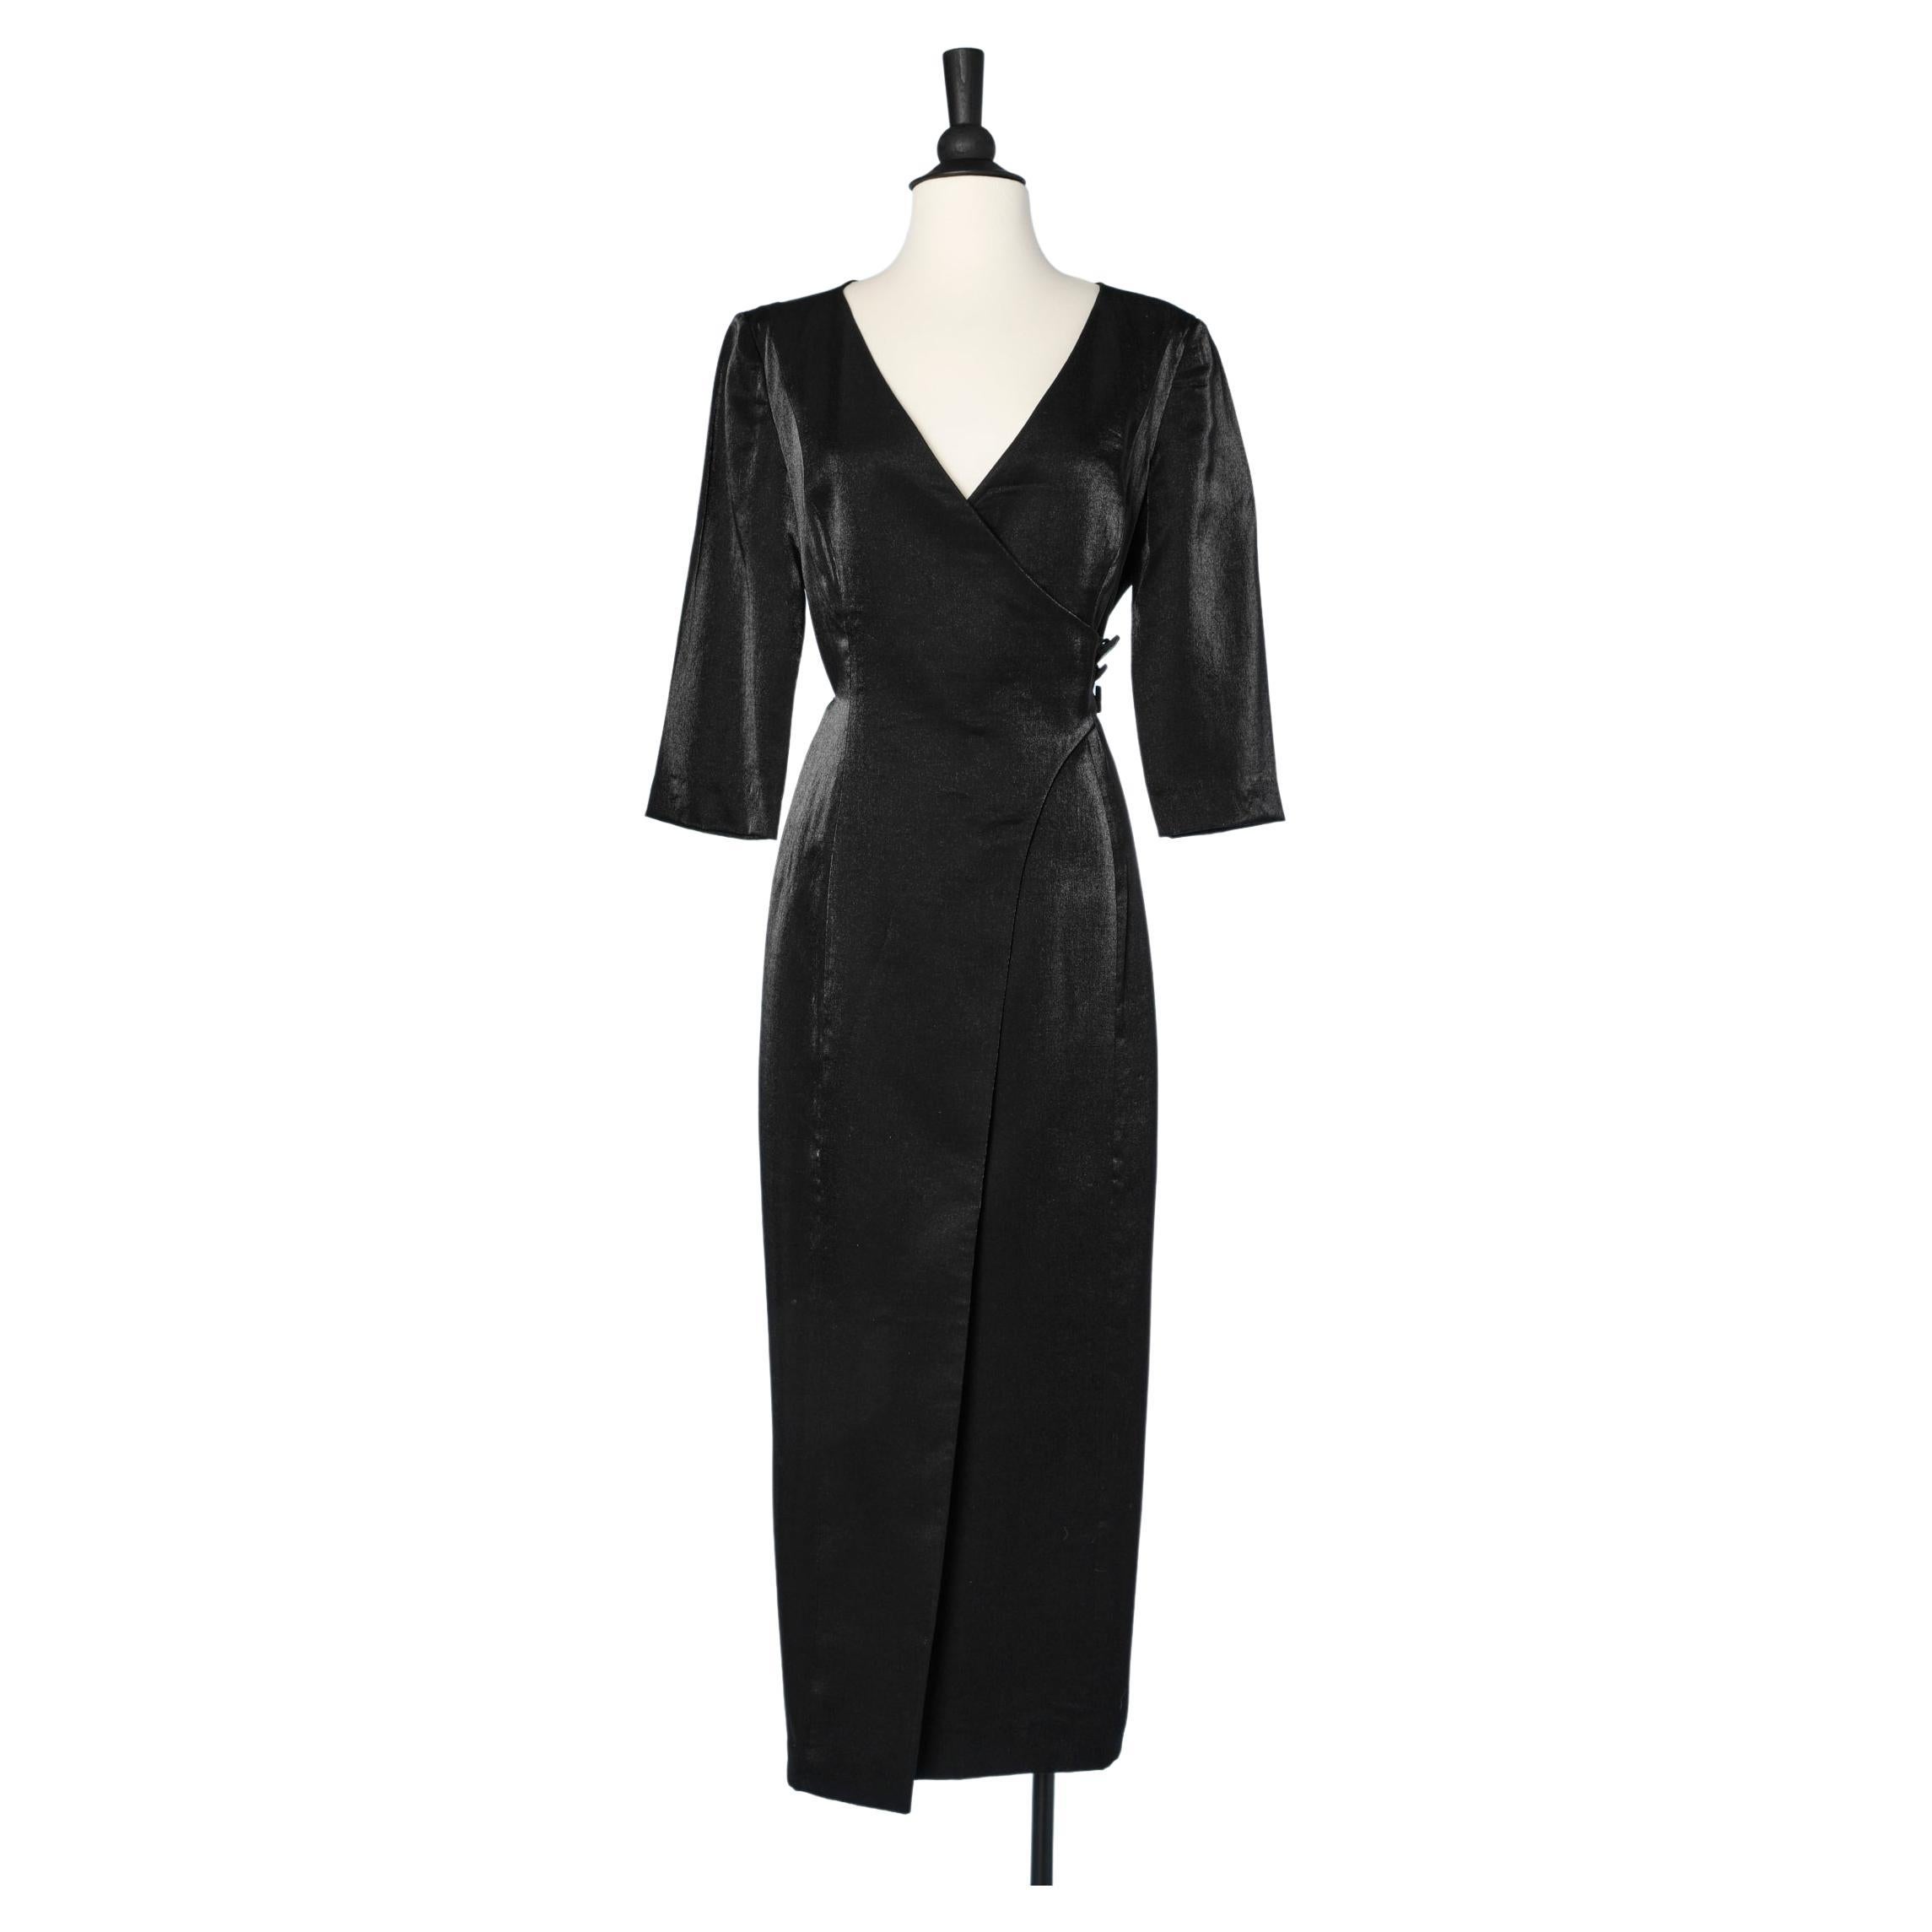 Wrapped cocktail dress in black shiny rayon and side buttons Paco Rabanne 